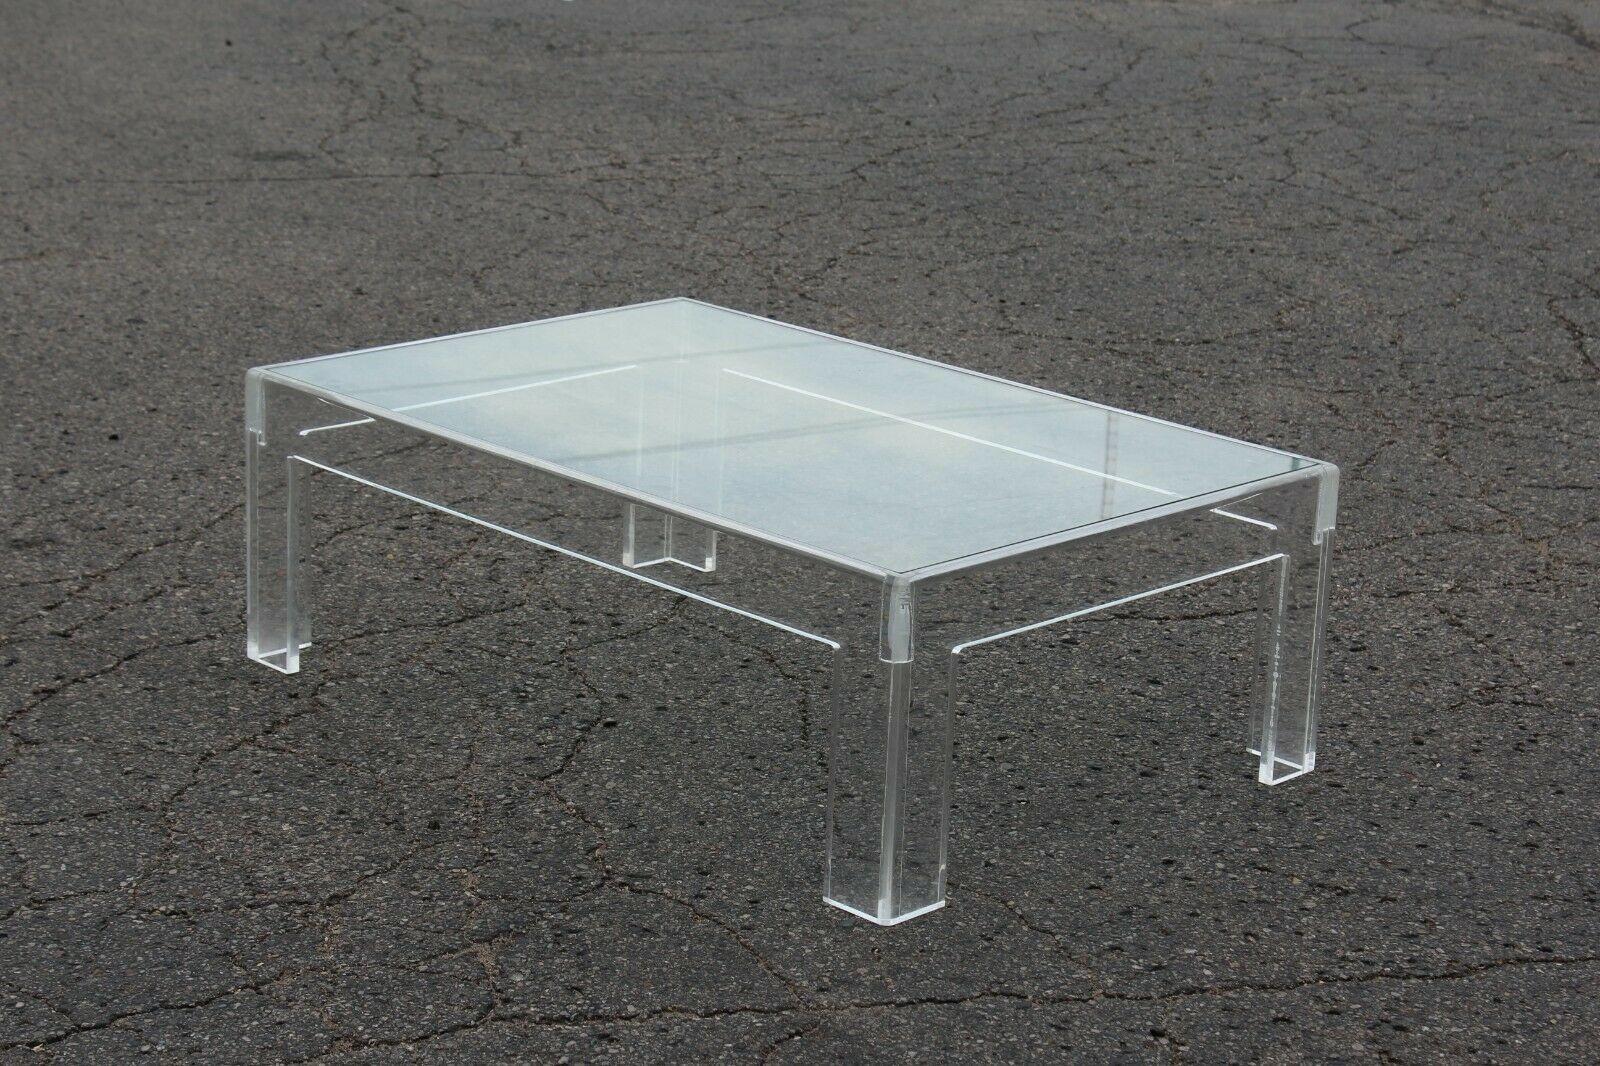 USA, 1970s
 
Thick lucite coffee table in a classic rectangular form. Glass inset top. Very nice in person. The clean lines, classic shape, and transparent qualities mean this can mix with any period of furniture. Lucite measures 3/4